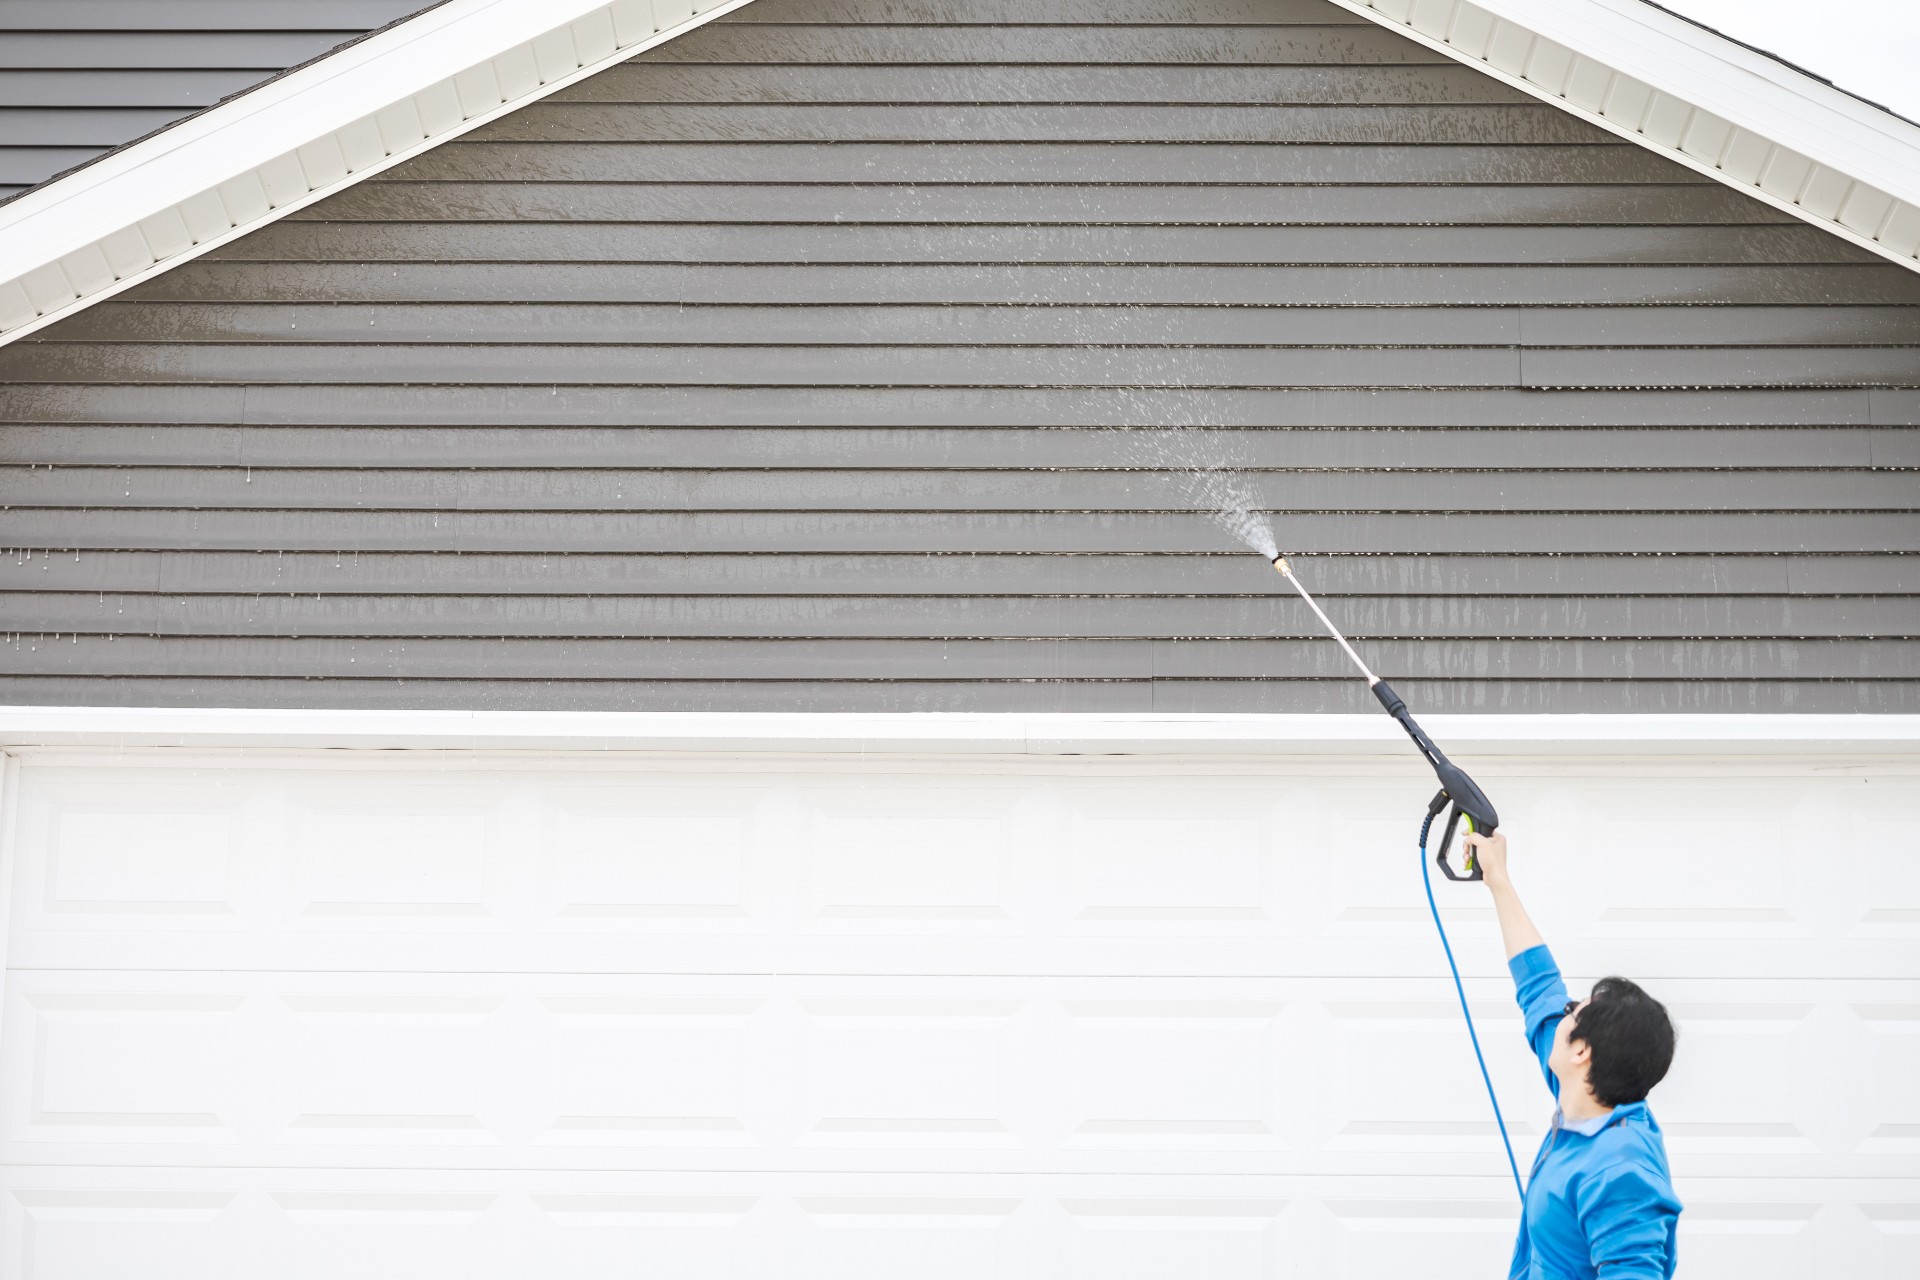 Man cleaning dirt and grime from exterior siding under the roof with a pressure washer.